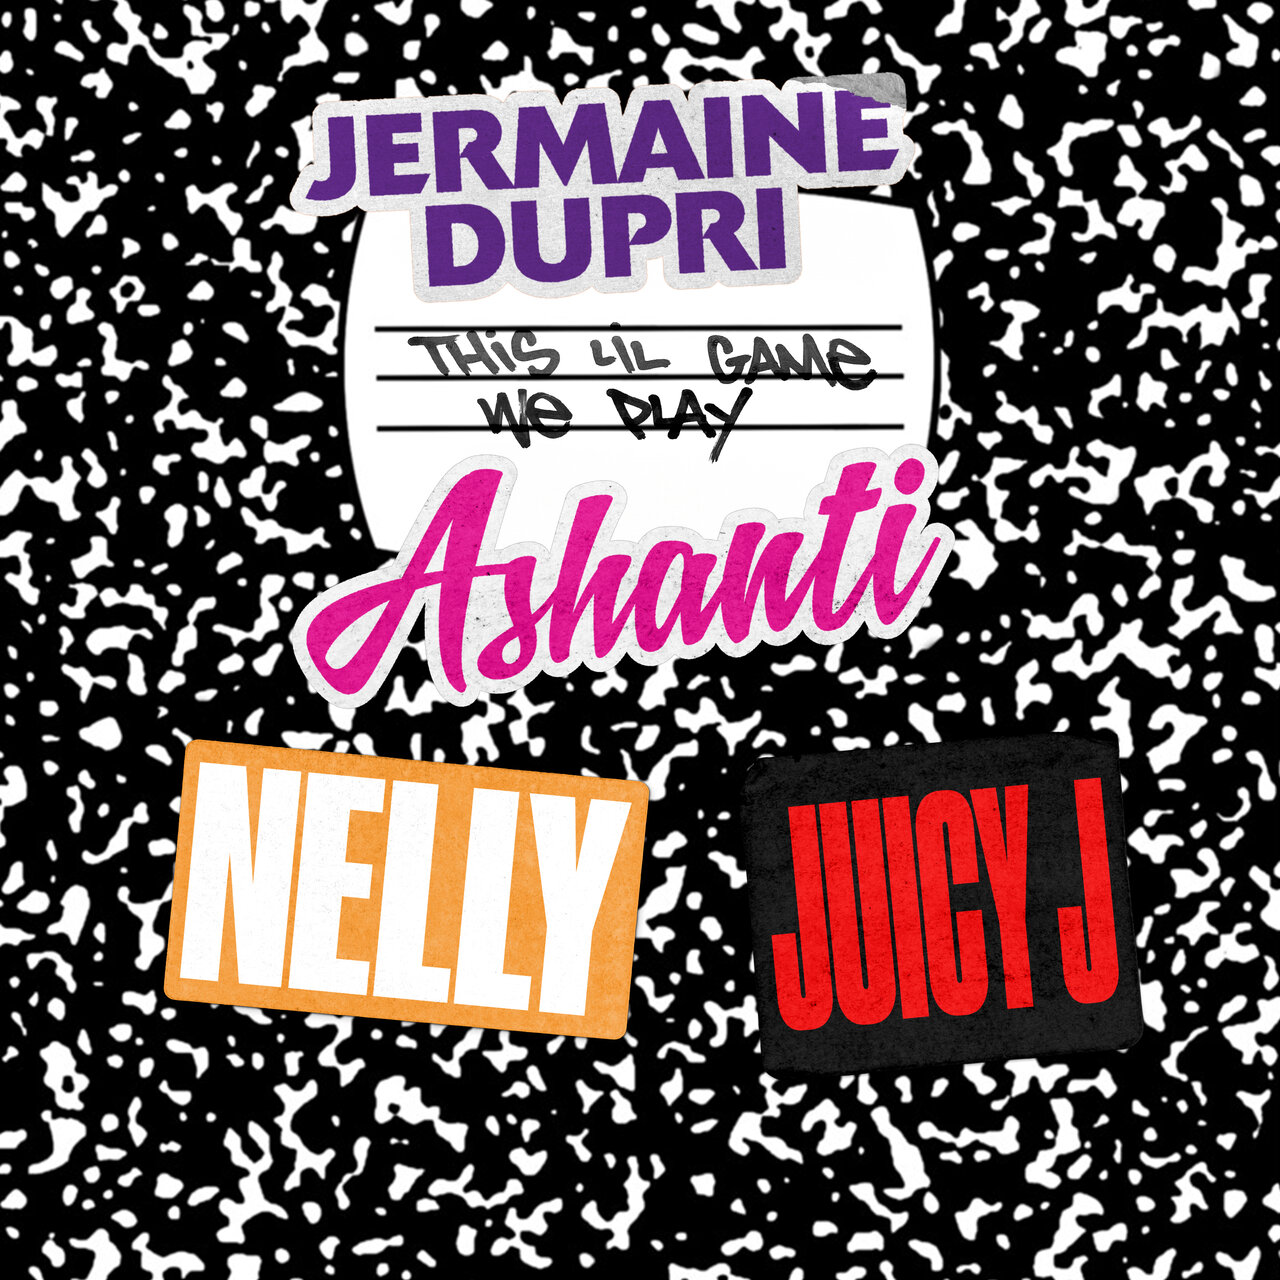 Jermaine Dupri featuring Ashanti, Nelly, & Juicy J — This Lil&#039; Game We Play cover artwork